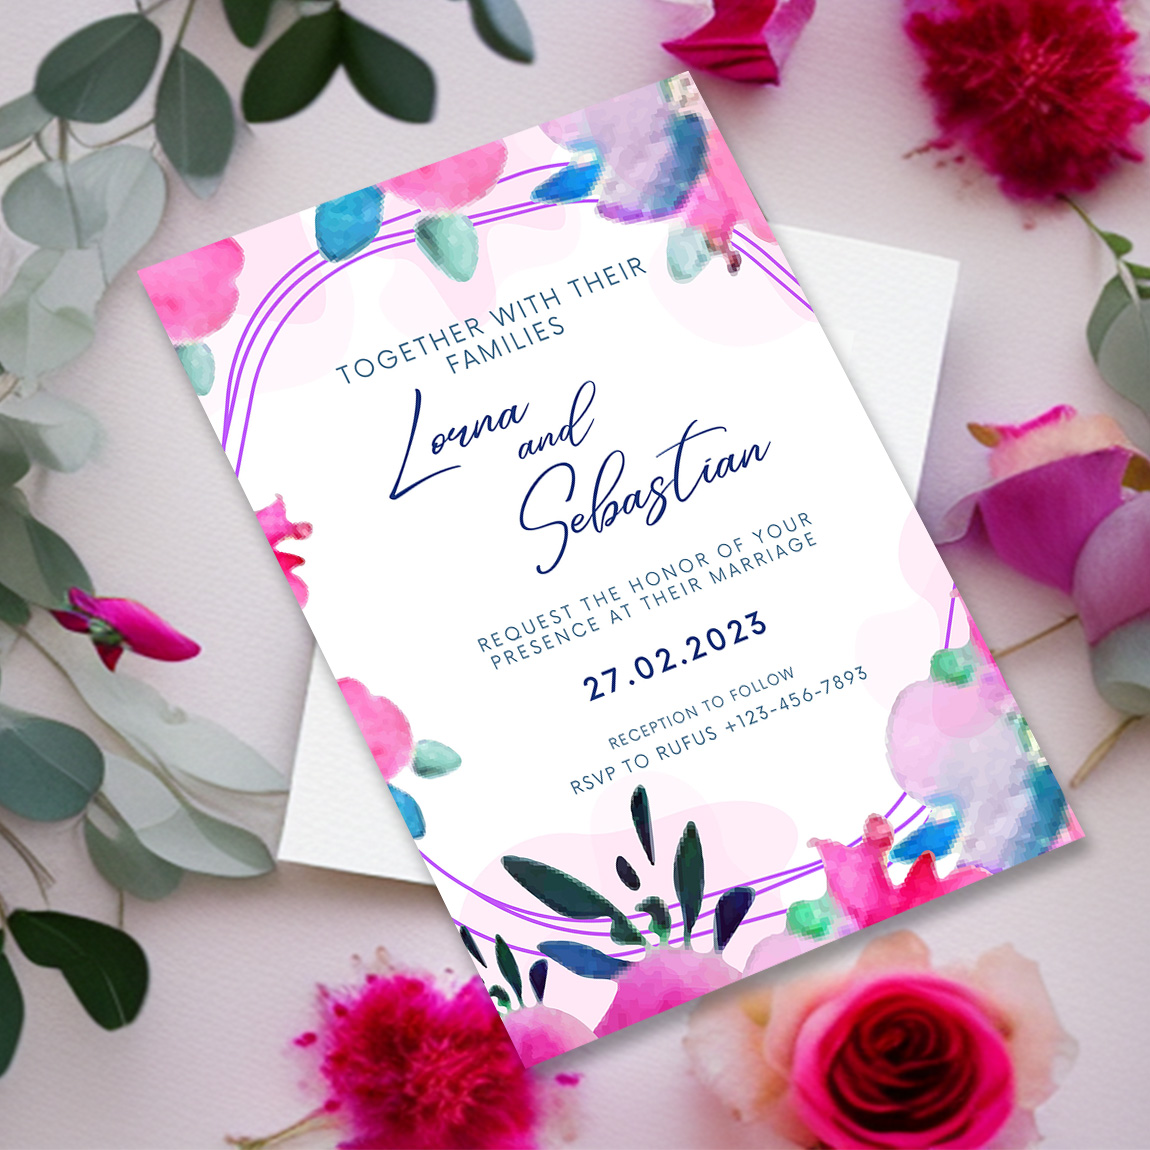 Image with gorgeous wedding invitation card with floral background.